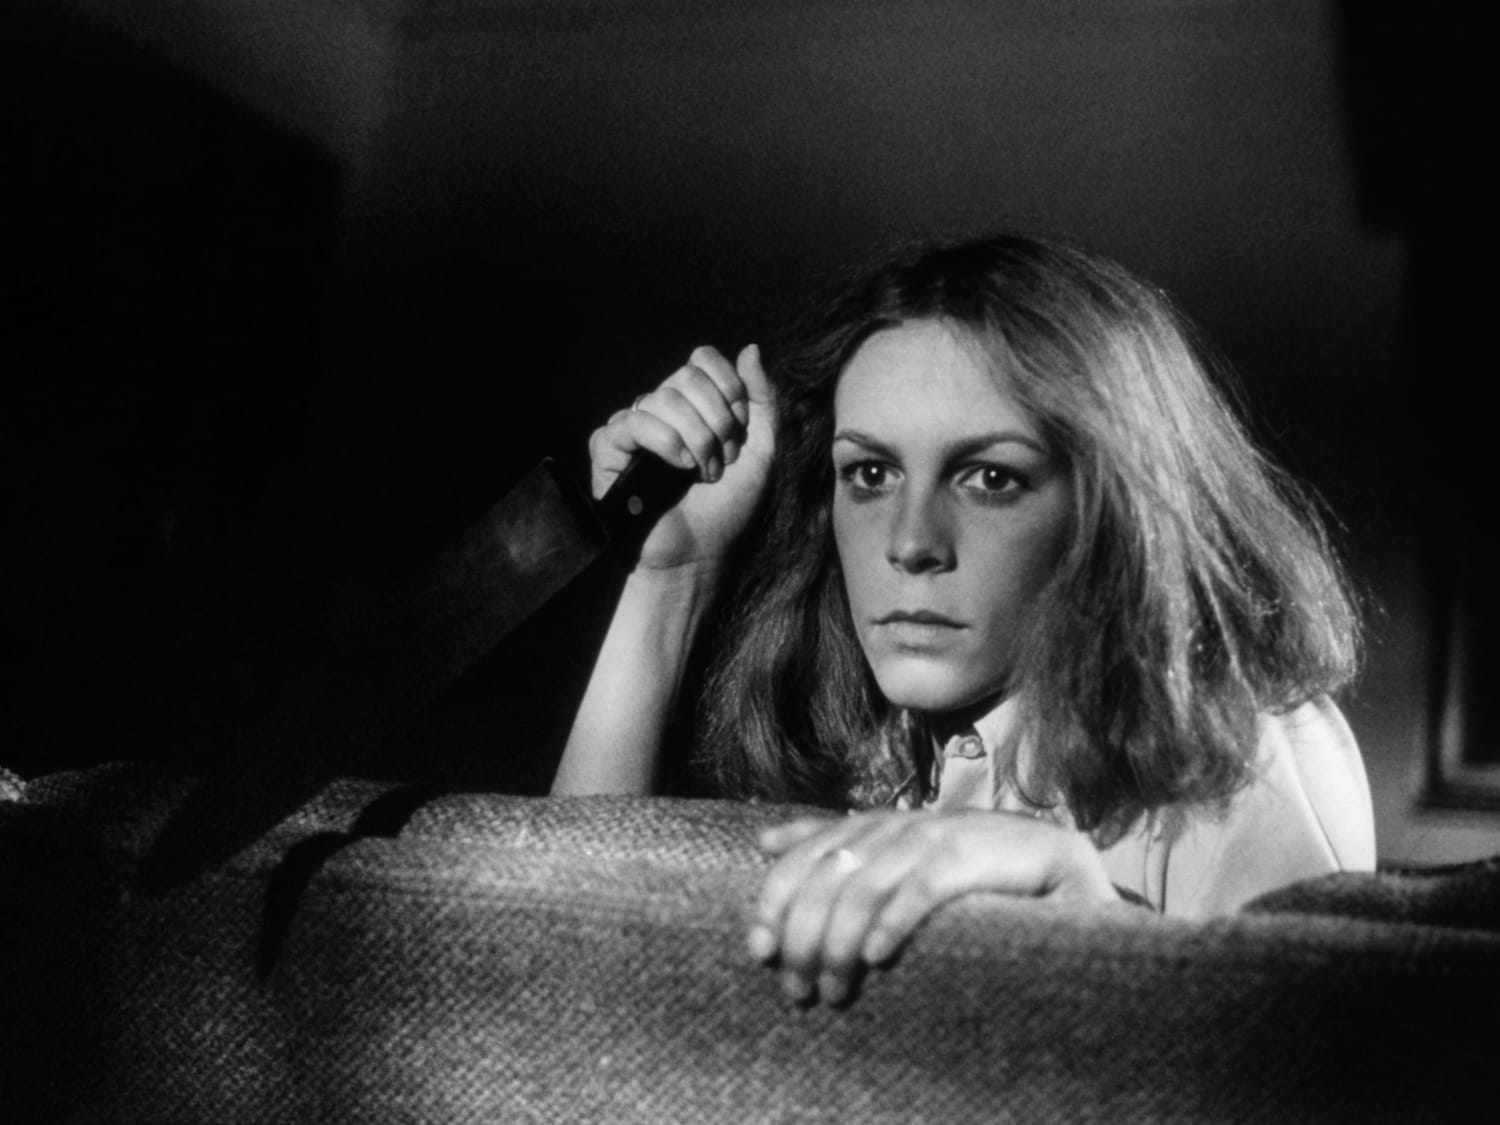 See Jamie Lee Curtis On The Set Of 'Halloween' In 70s-Era Photos